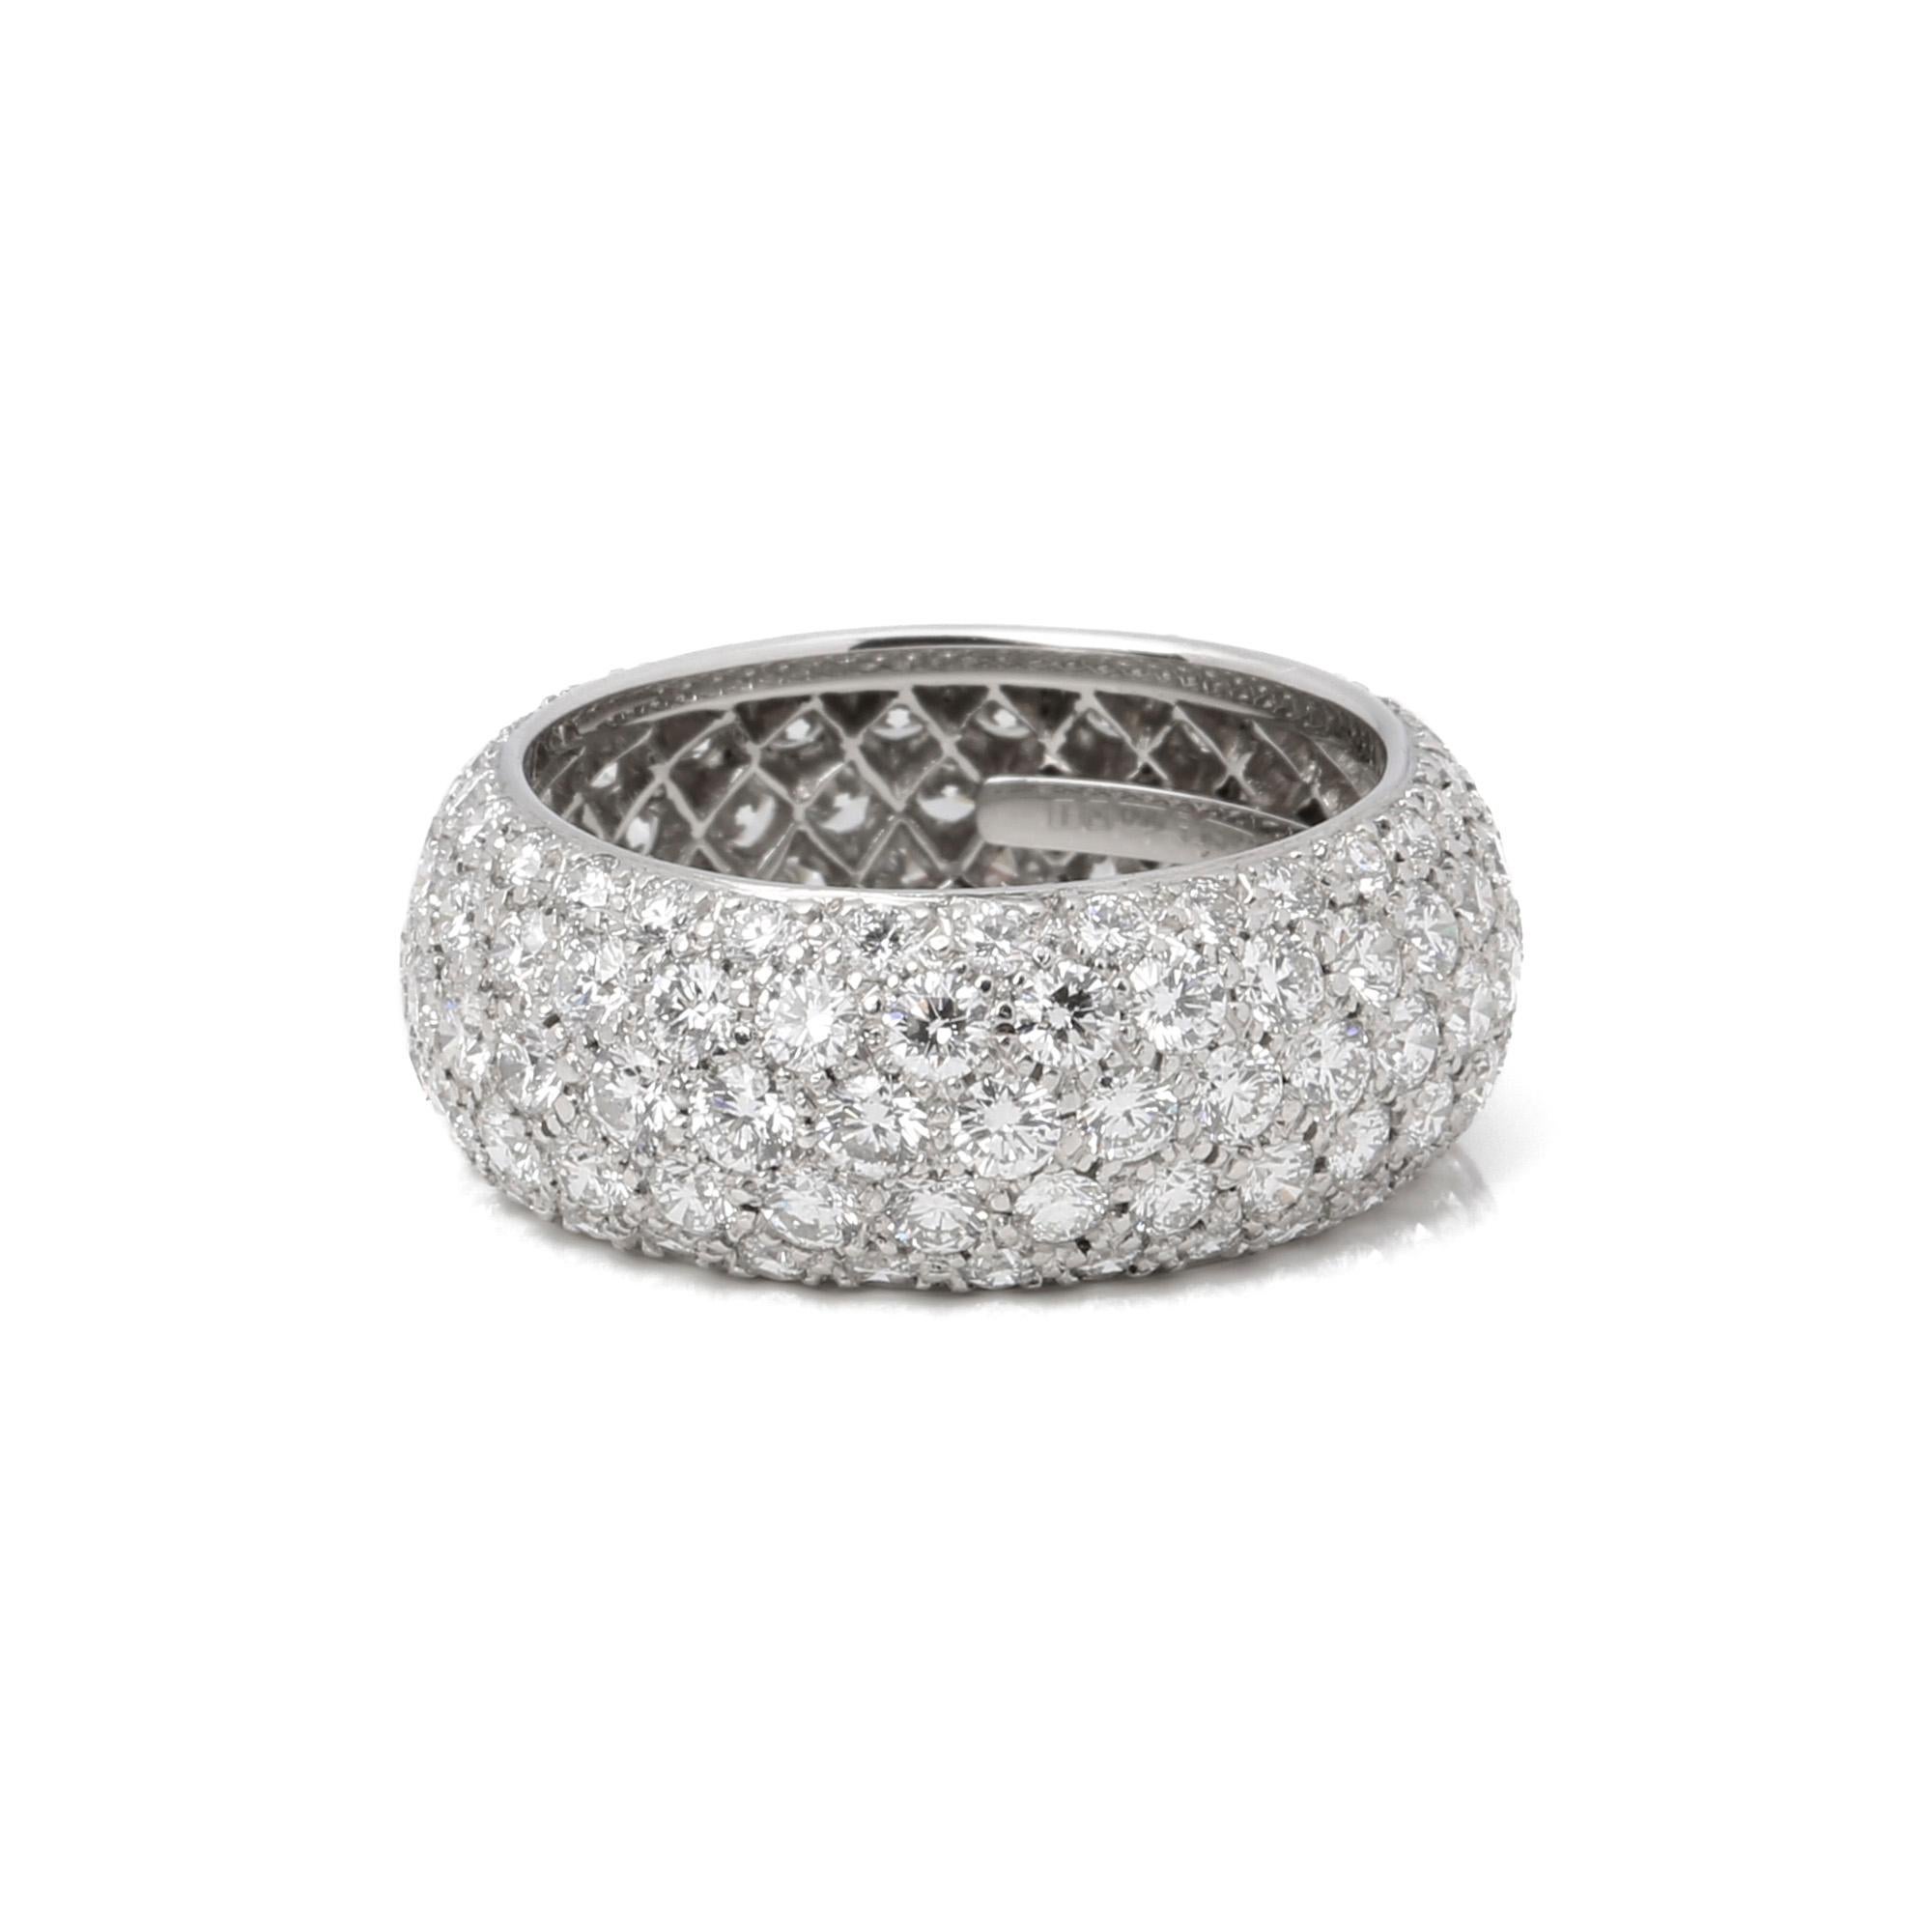 This ring by Tiffany & Co is from their Etoile collection and features 5 rows of round brilliant cut diamonds with a total weight of 3.3ct, G colour and VS clarity. Made in Platinum. UK ring size L. EU ring size 51. US ring size 6. Complete with a